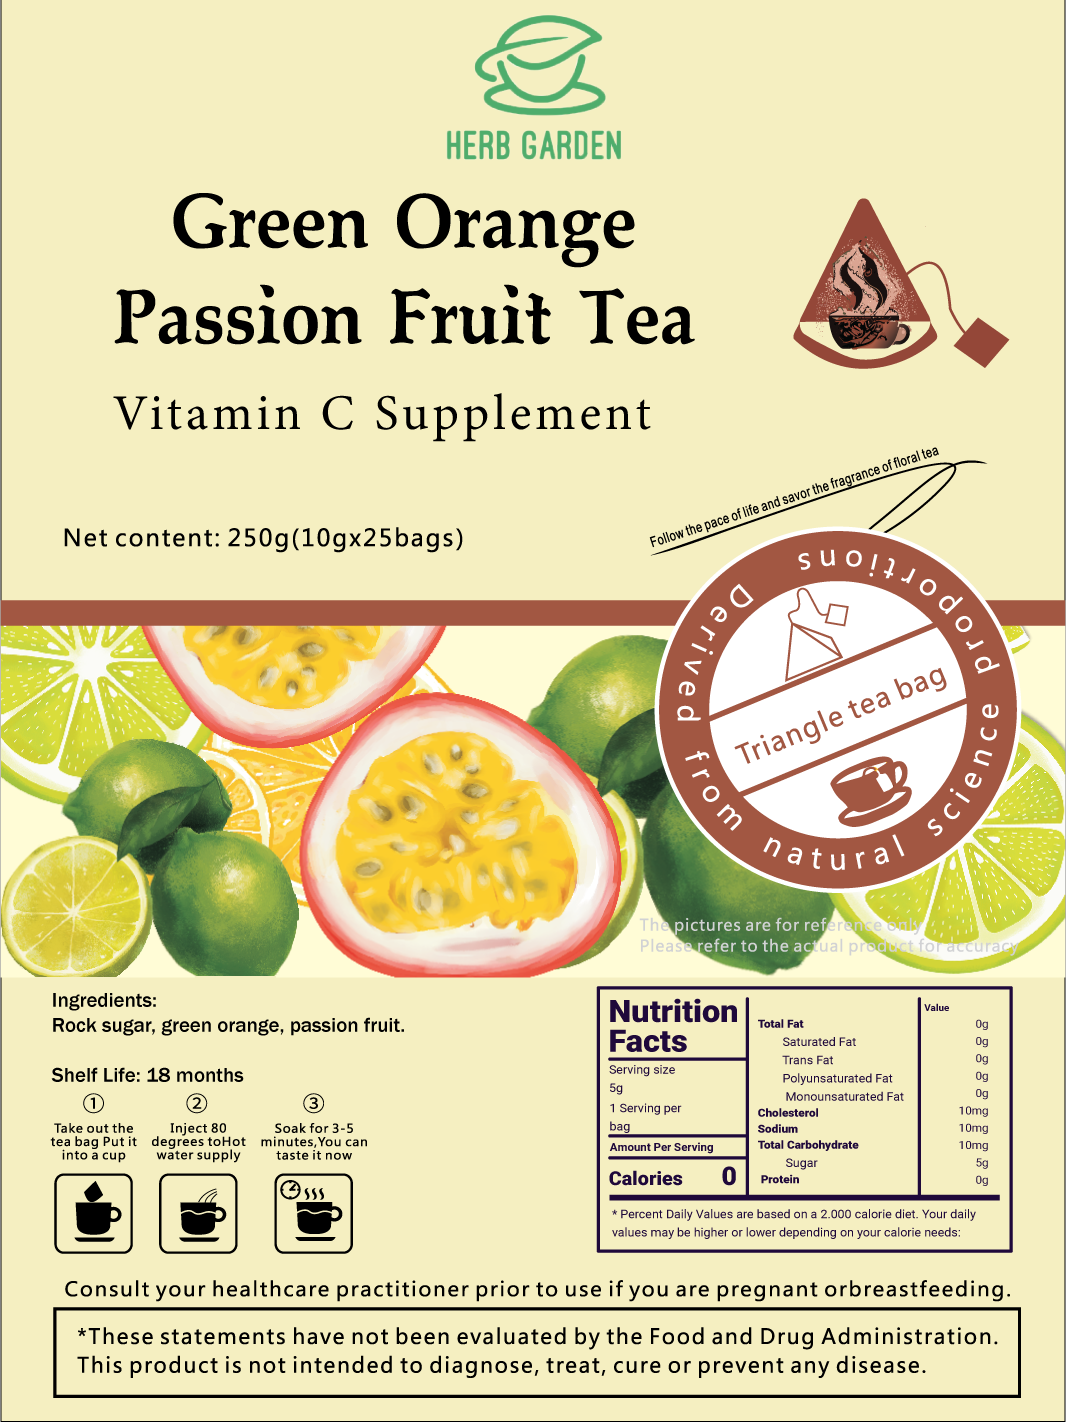 Green Orange Passion Fruit Tea 250g (10g x 25 bags) x 2 packages